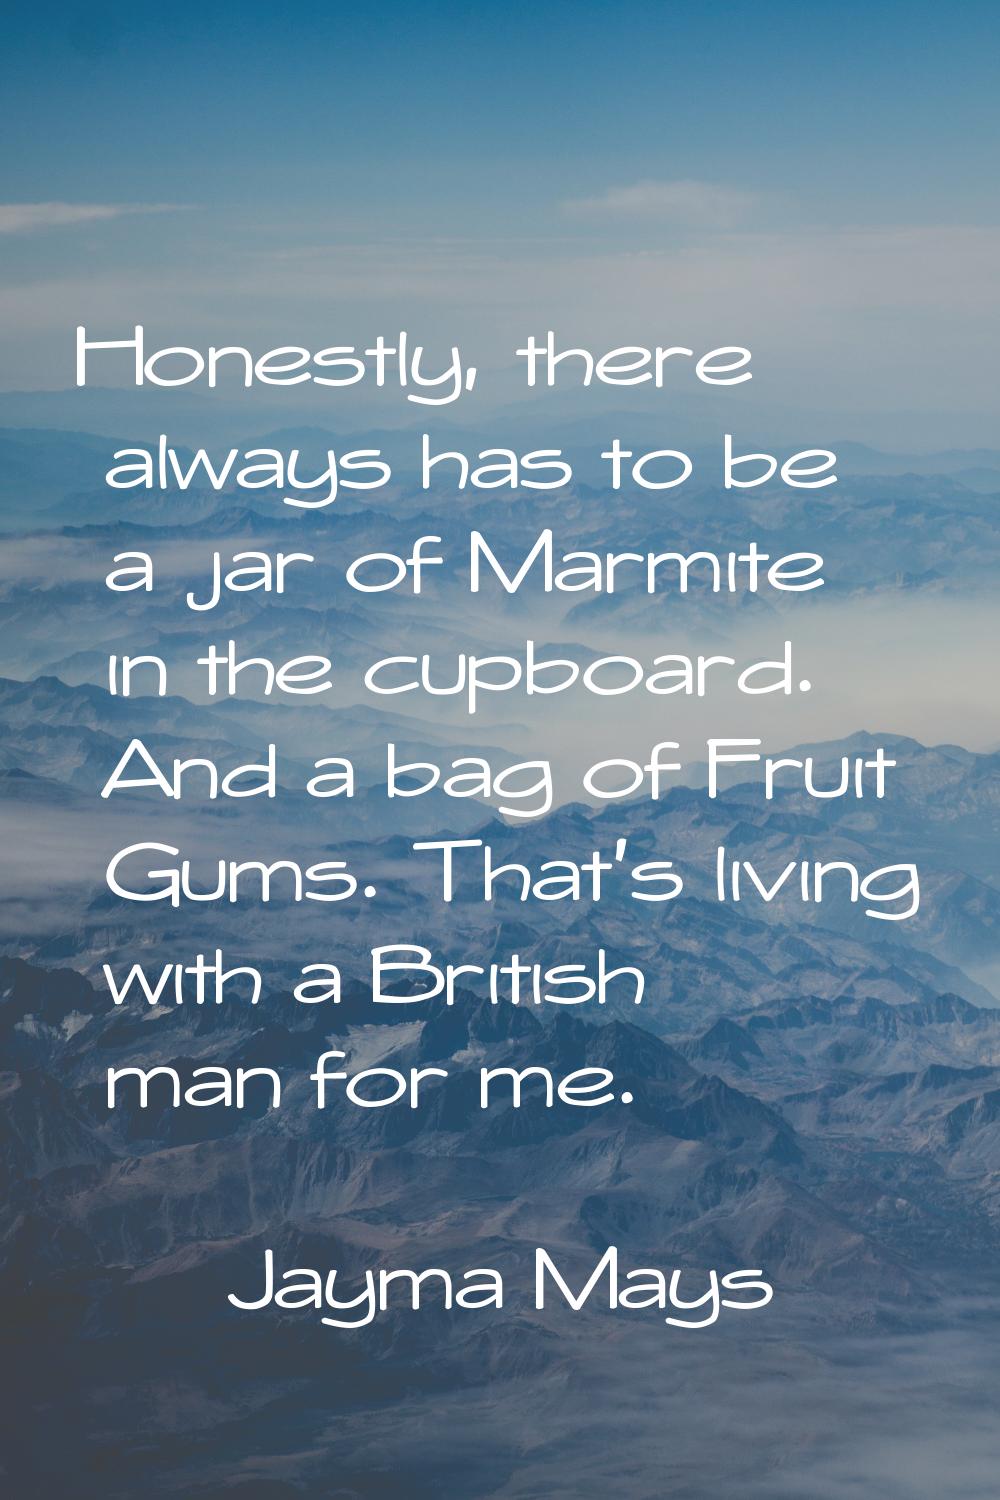 Honestly, there always has to be a jar of Marmite in the cupboard. And a bag of Fruit Gums. That's 